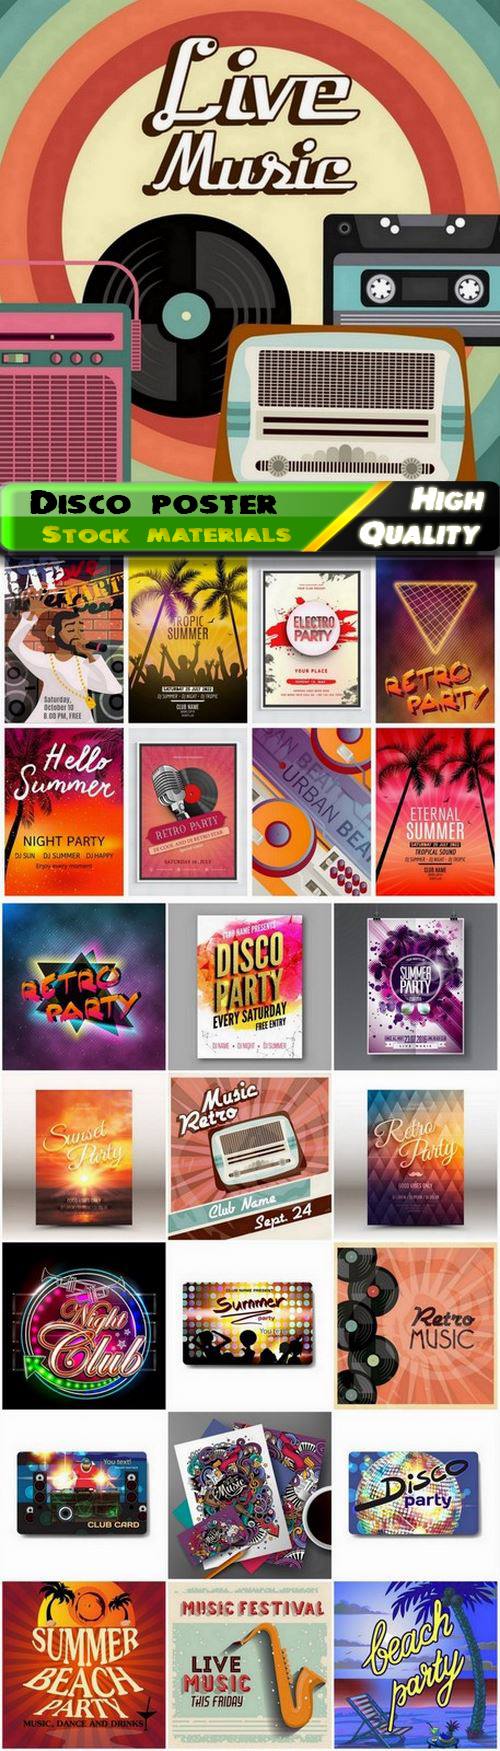 Disco poster and retro flyer for night party - 25 Eps